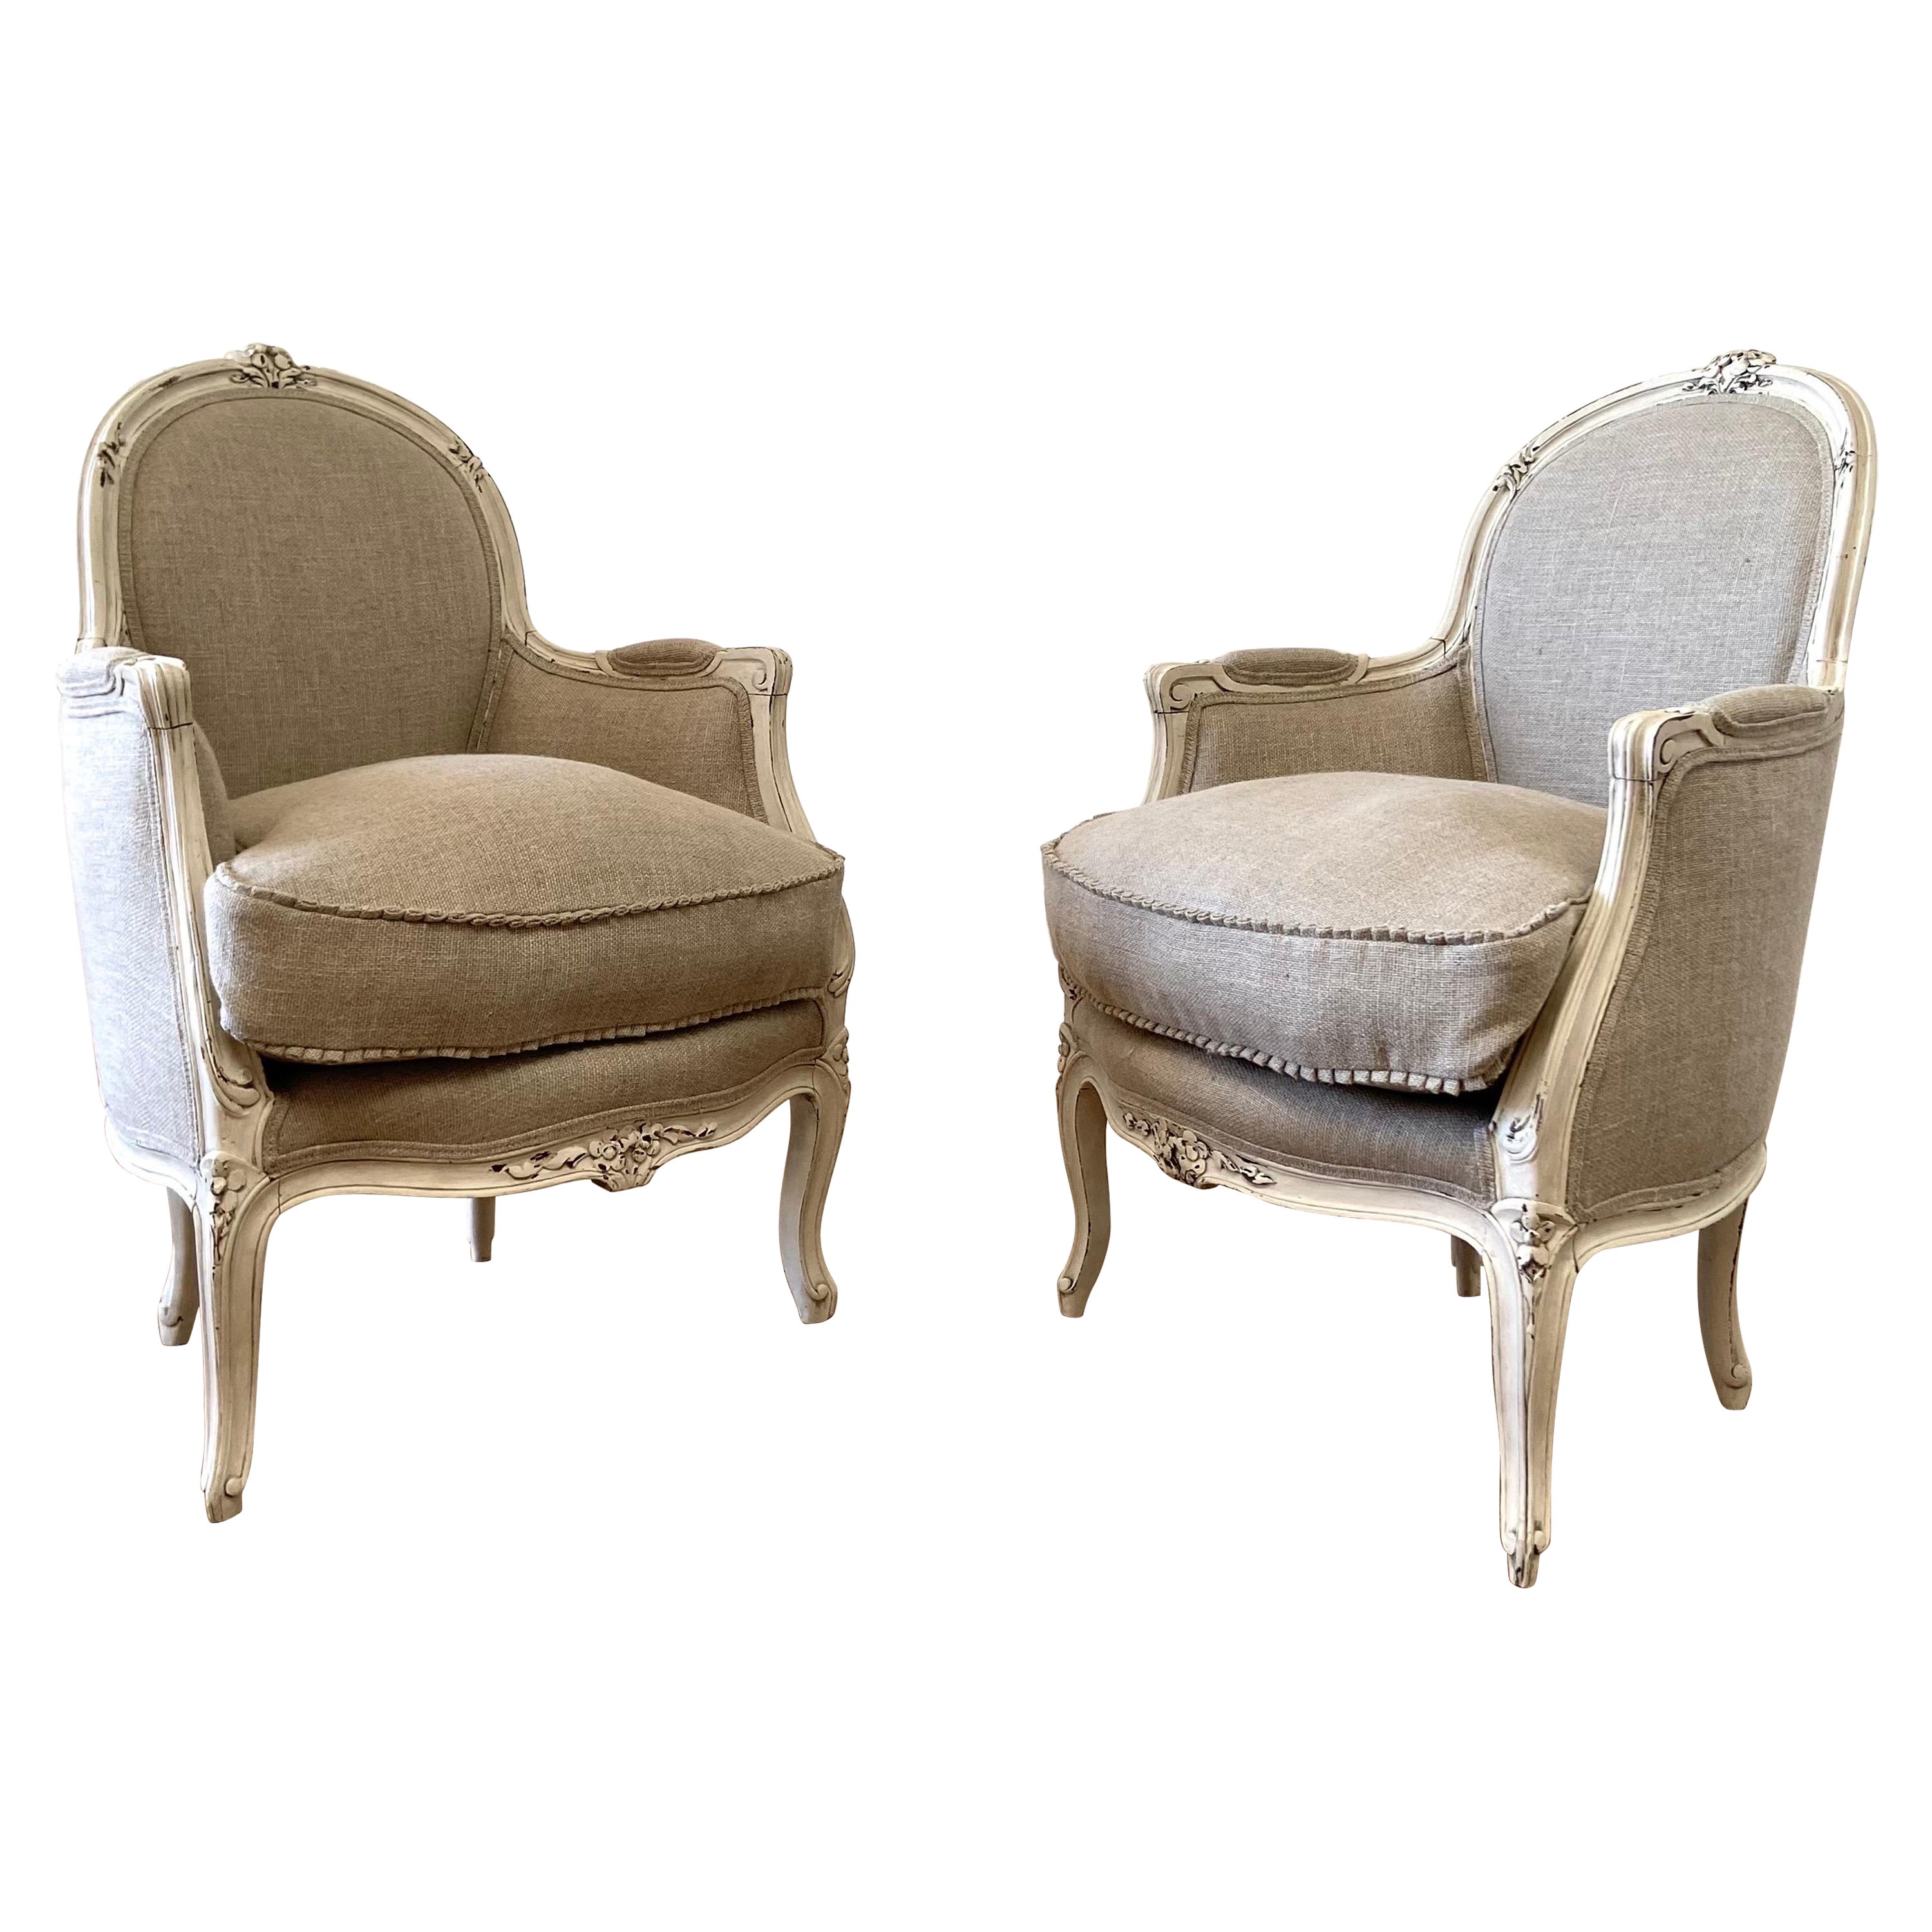 19th Century Pair of Painted and Upholstered Linen Bergere Chairs